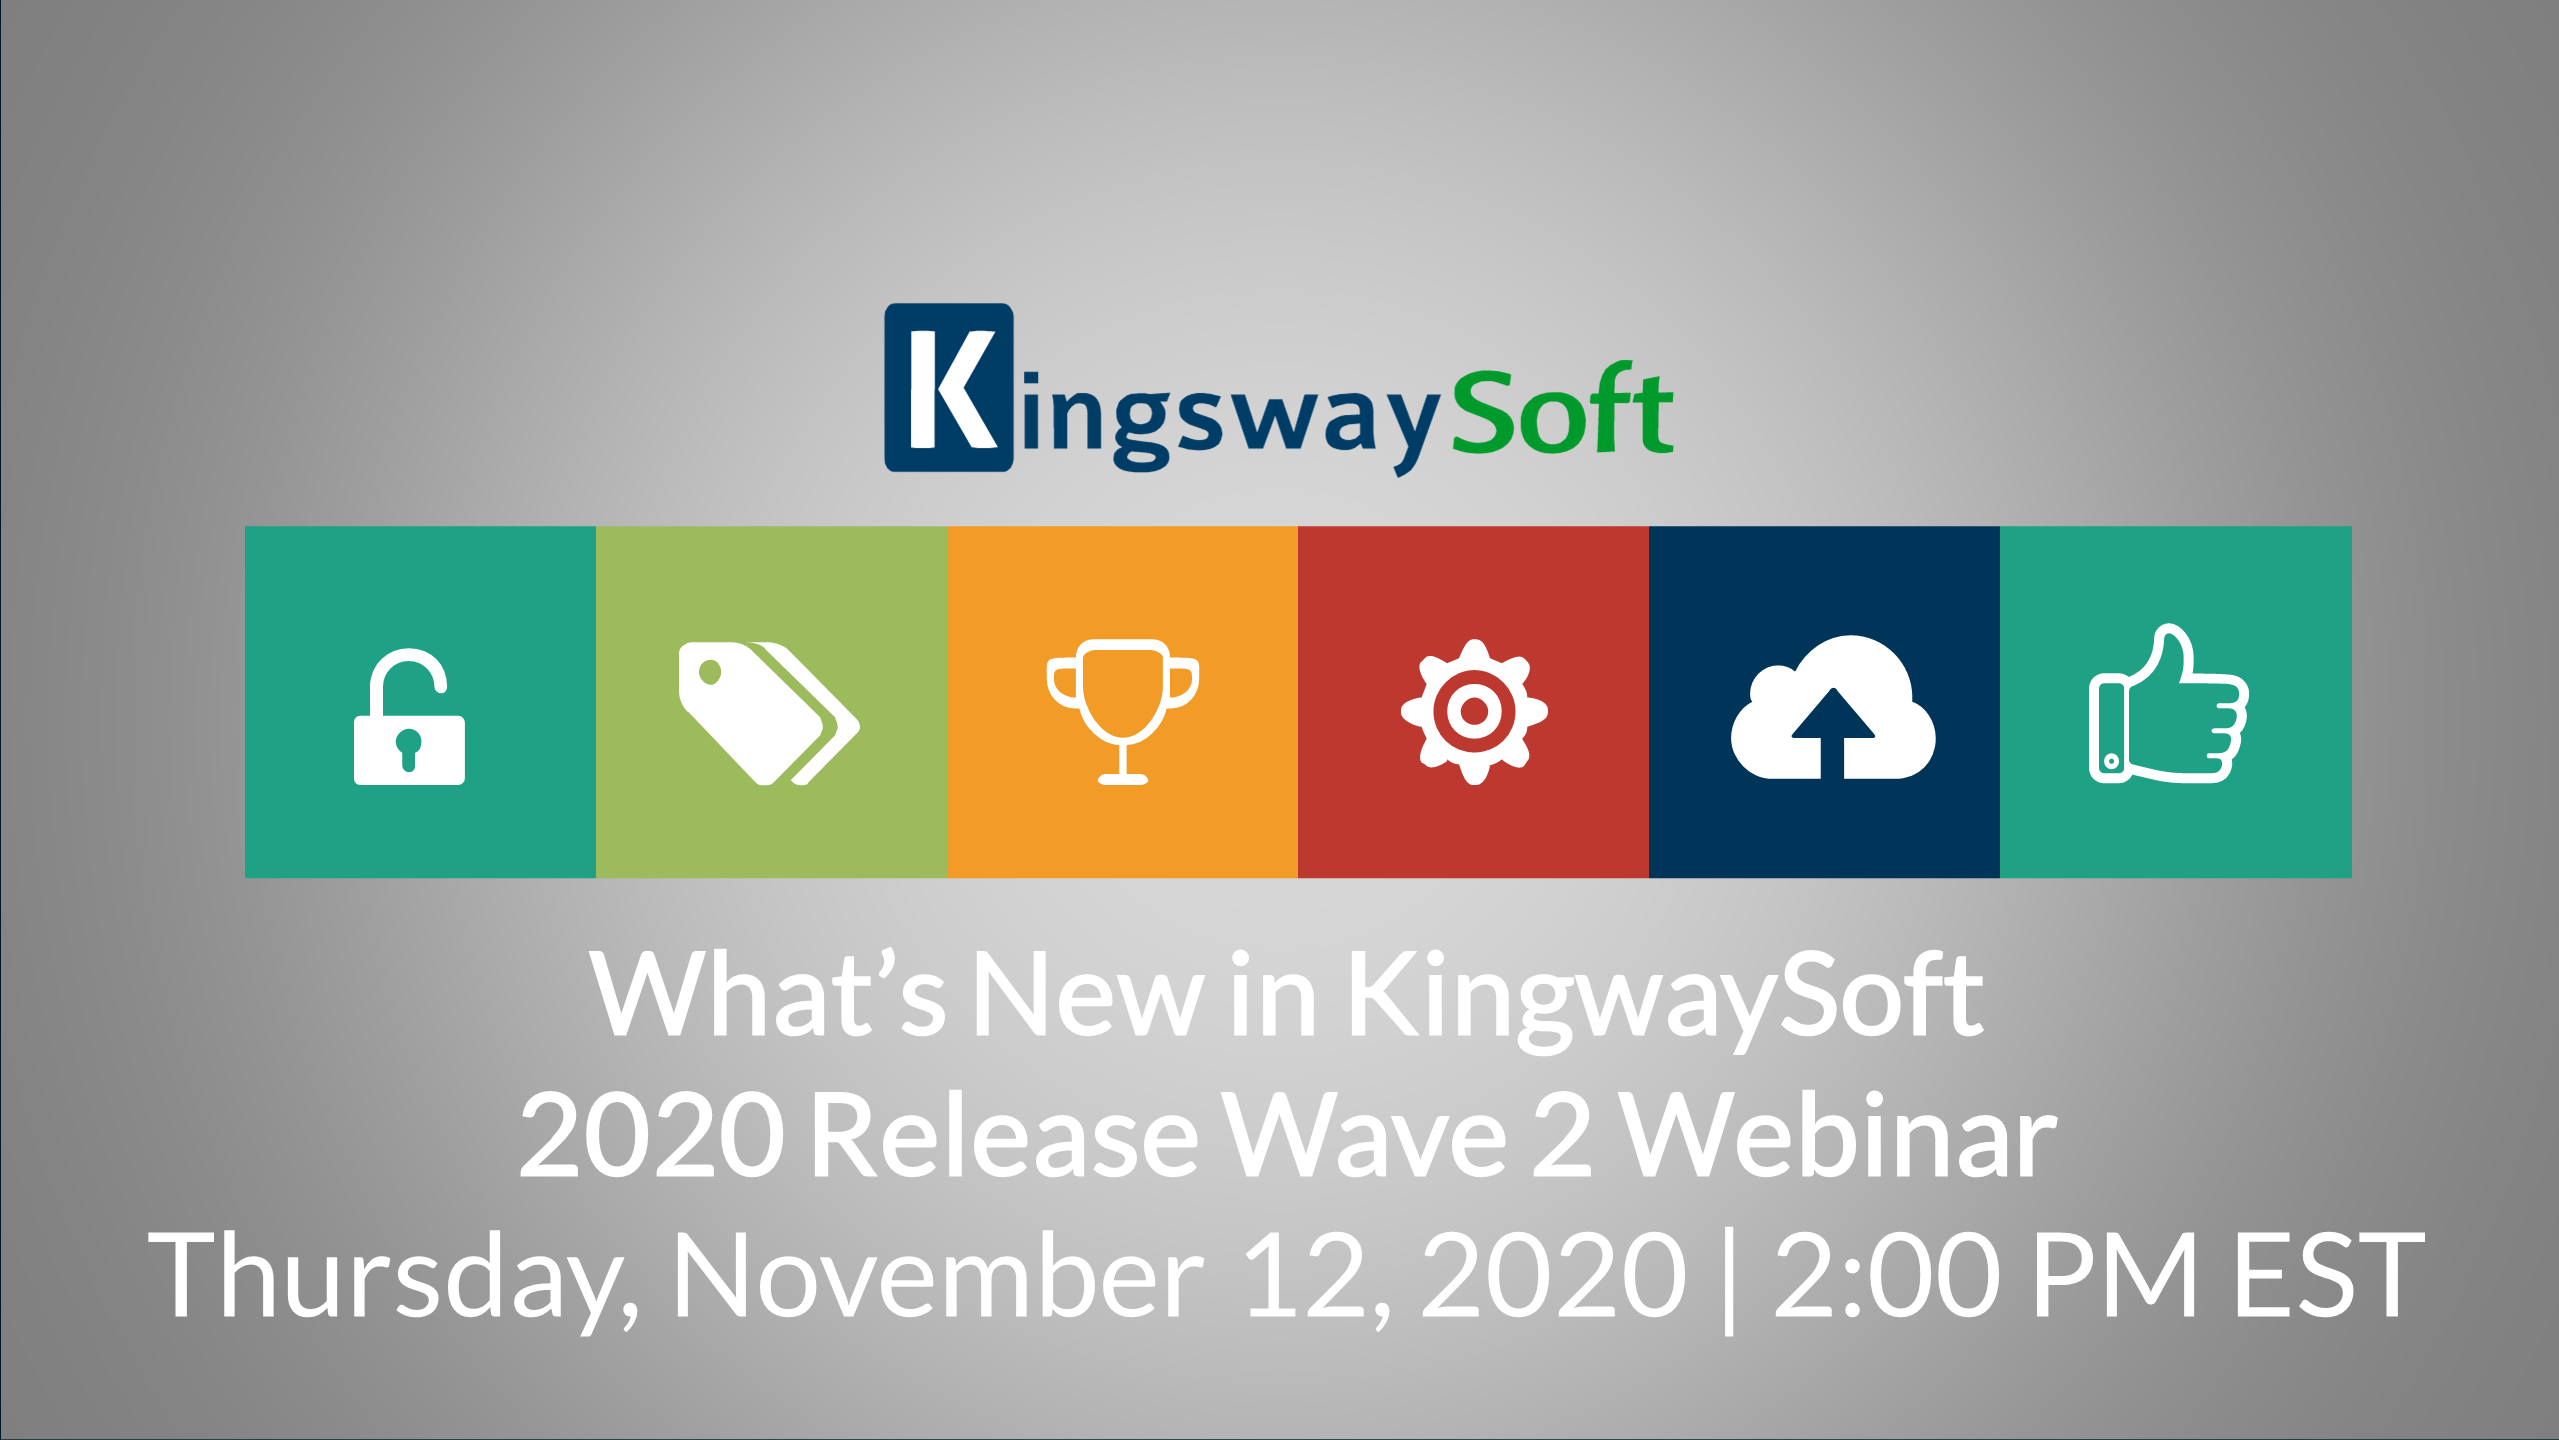 What's New with KingswaySoft 2020 Release Wave 2 Webinar